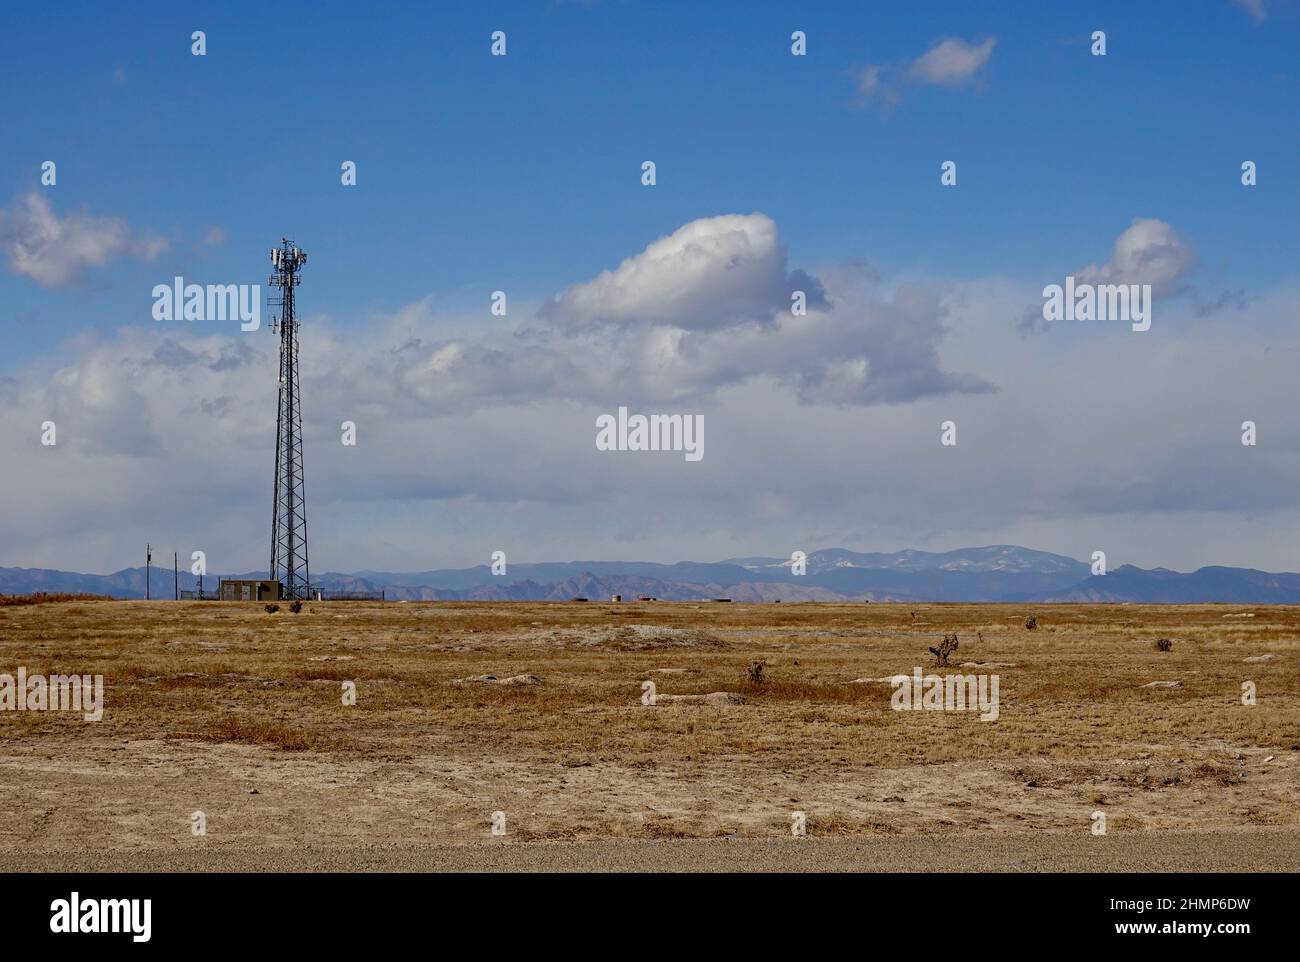 tall radio tower in a desert landscape Stock Photo